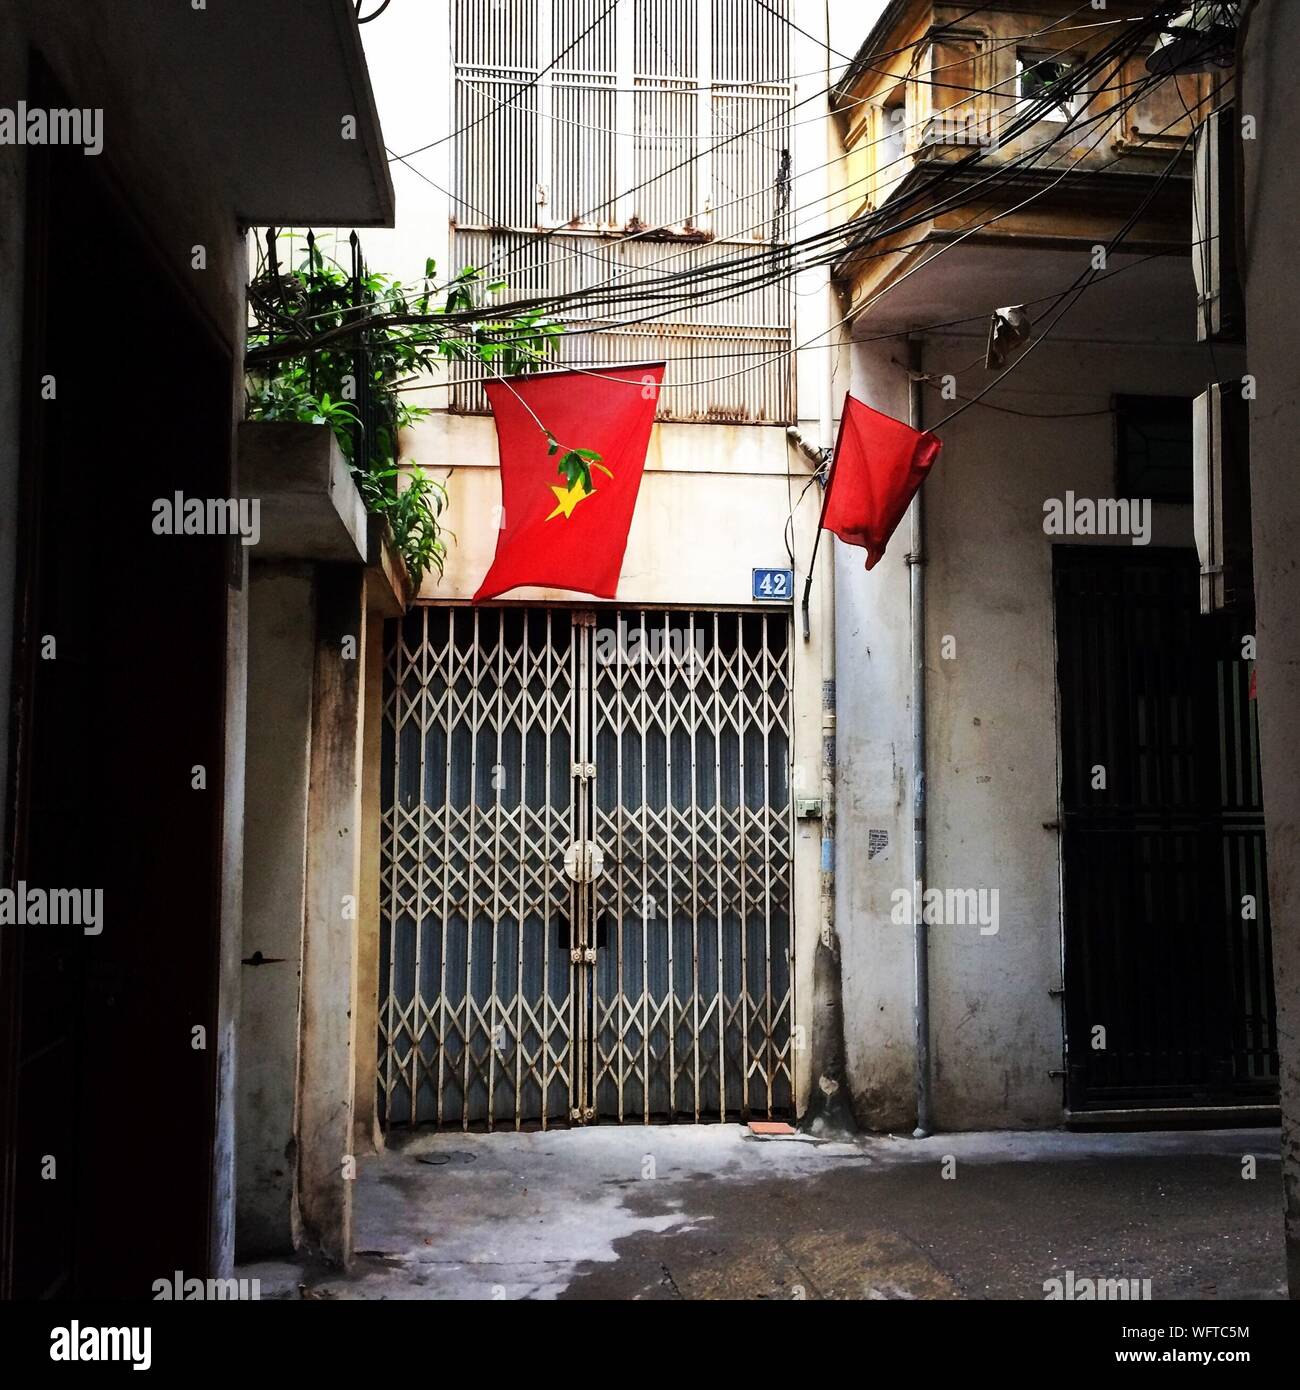 Red Flags Hanging Outside Building Stock Photo